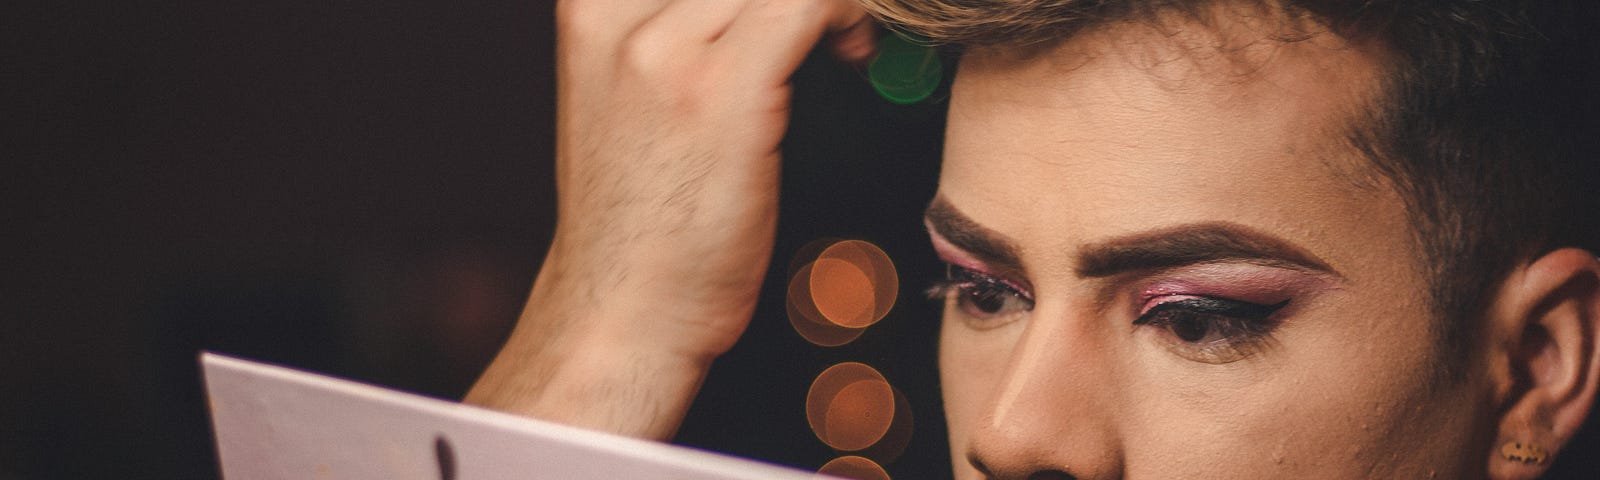 A performer applies makeup while using the mirror on their blush pad. Their eyebrows are slightly furrowed. They appear deep in concentration. They have colorful eyeshadow and winged eyeliner.